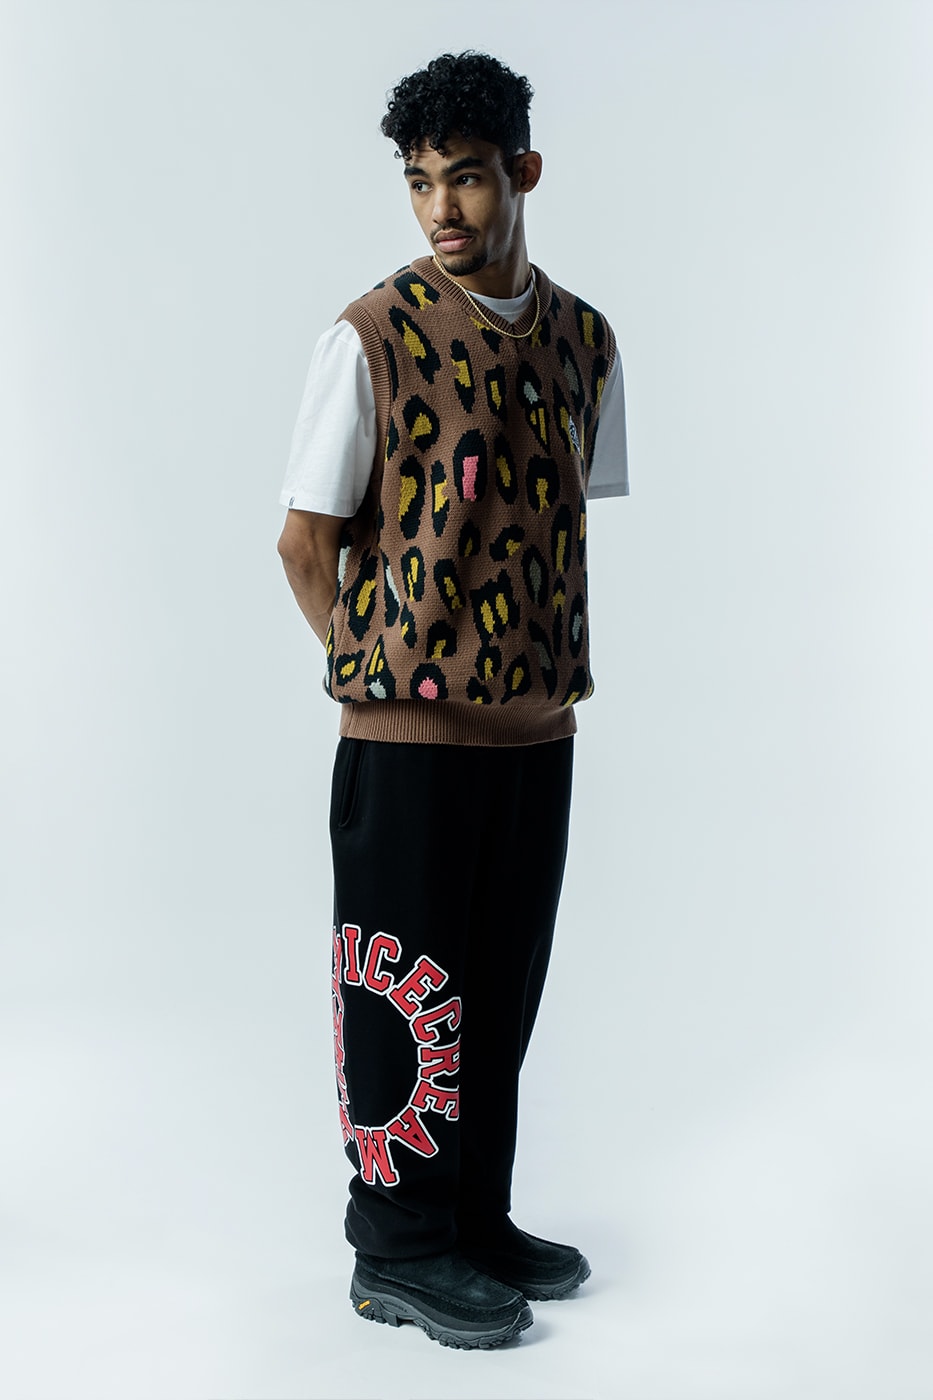 ICECREAM Spring 2023 Collection Gives a Refreshed Take On Archived Graphics pharell williams bbc billionaire boys club nigo tokyo japan